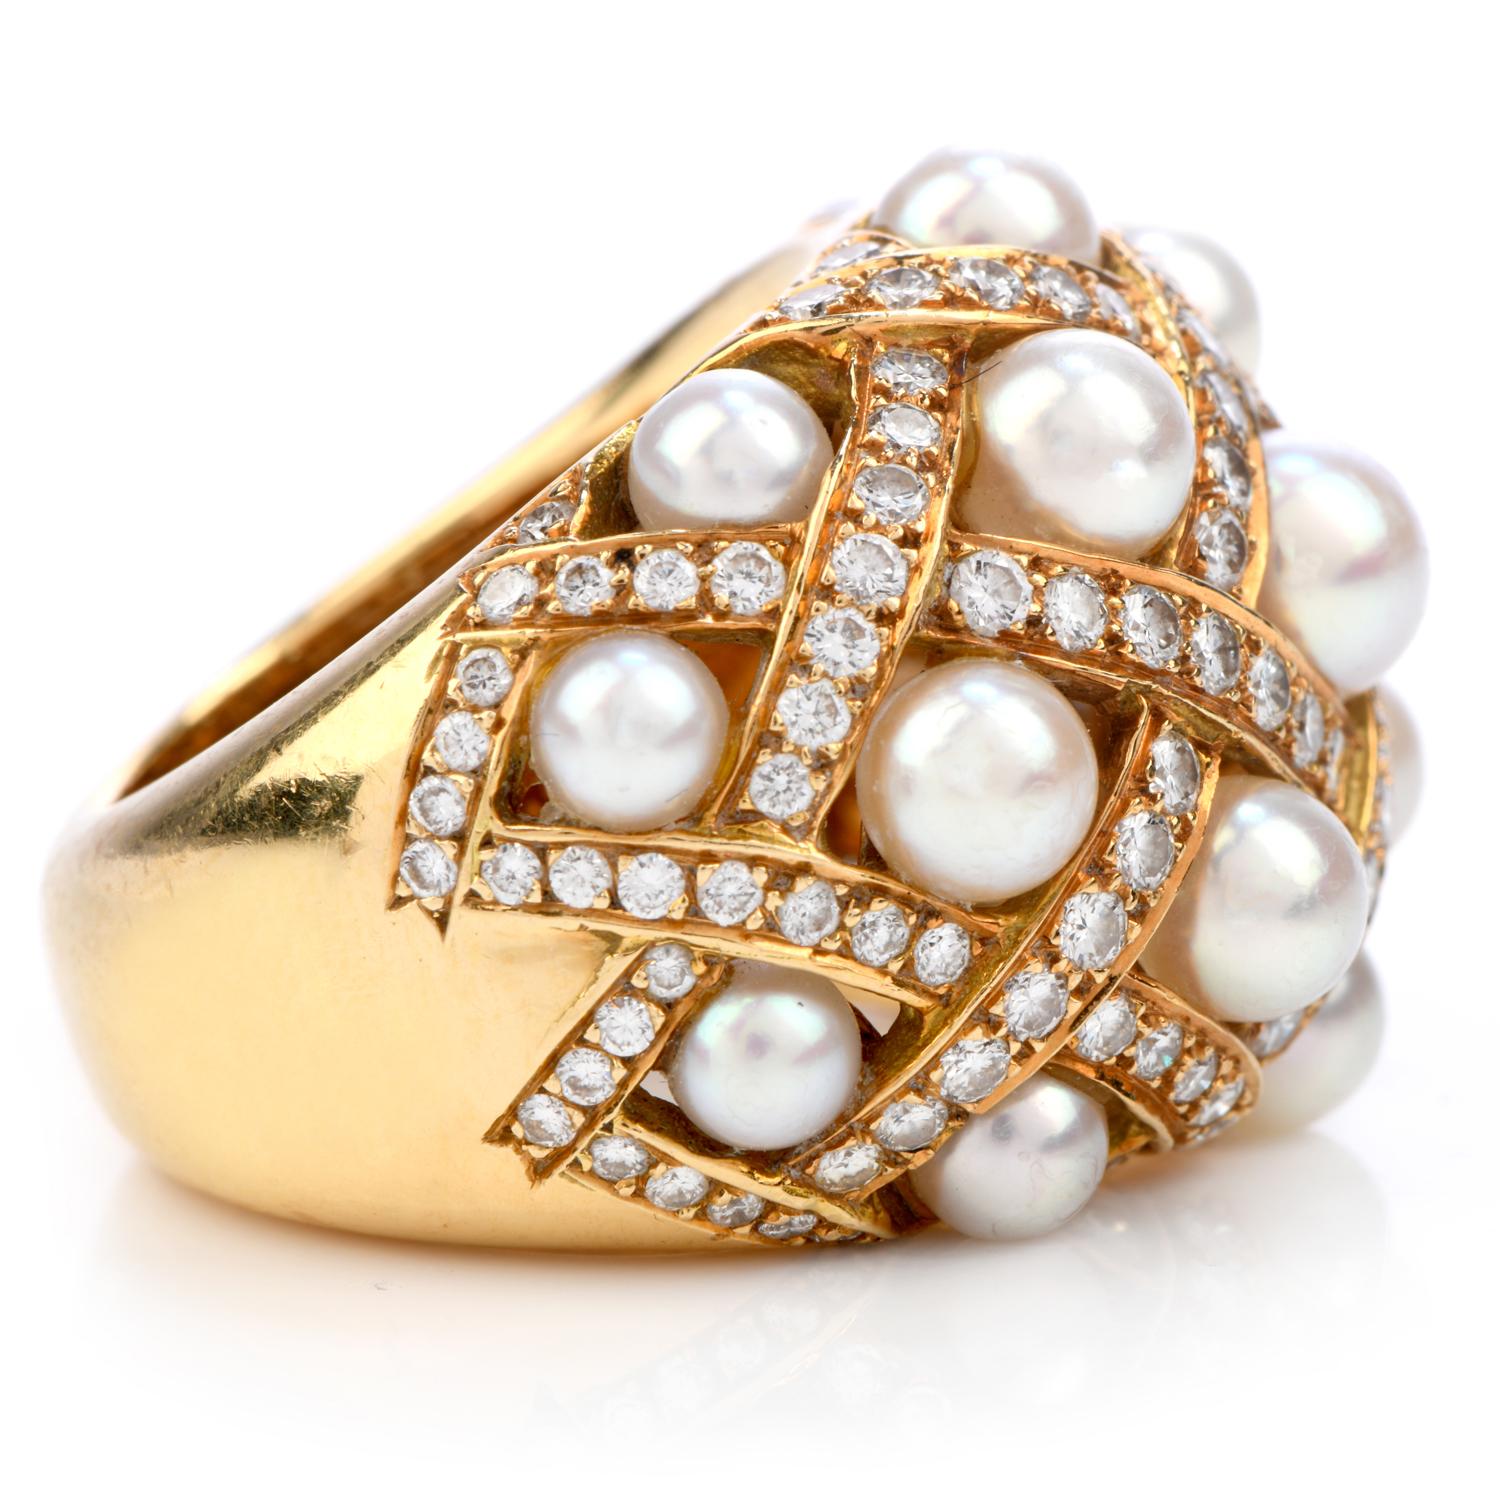 An intricate mix of diamond & pearls on this piece from the world-known Designer House Chanel! 

with a dome woven style, this piece is crafted in solid 18K yellow gold. 

from the Collection Matelassé, this piece has 17 cultured Akoya pearls,